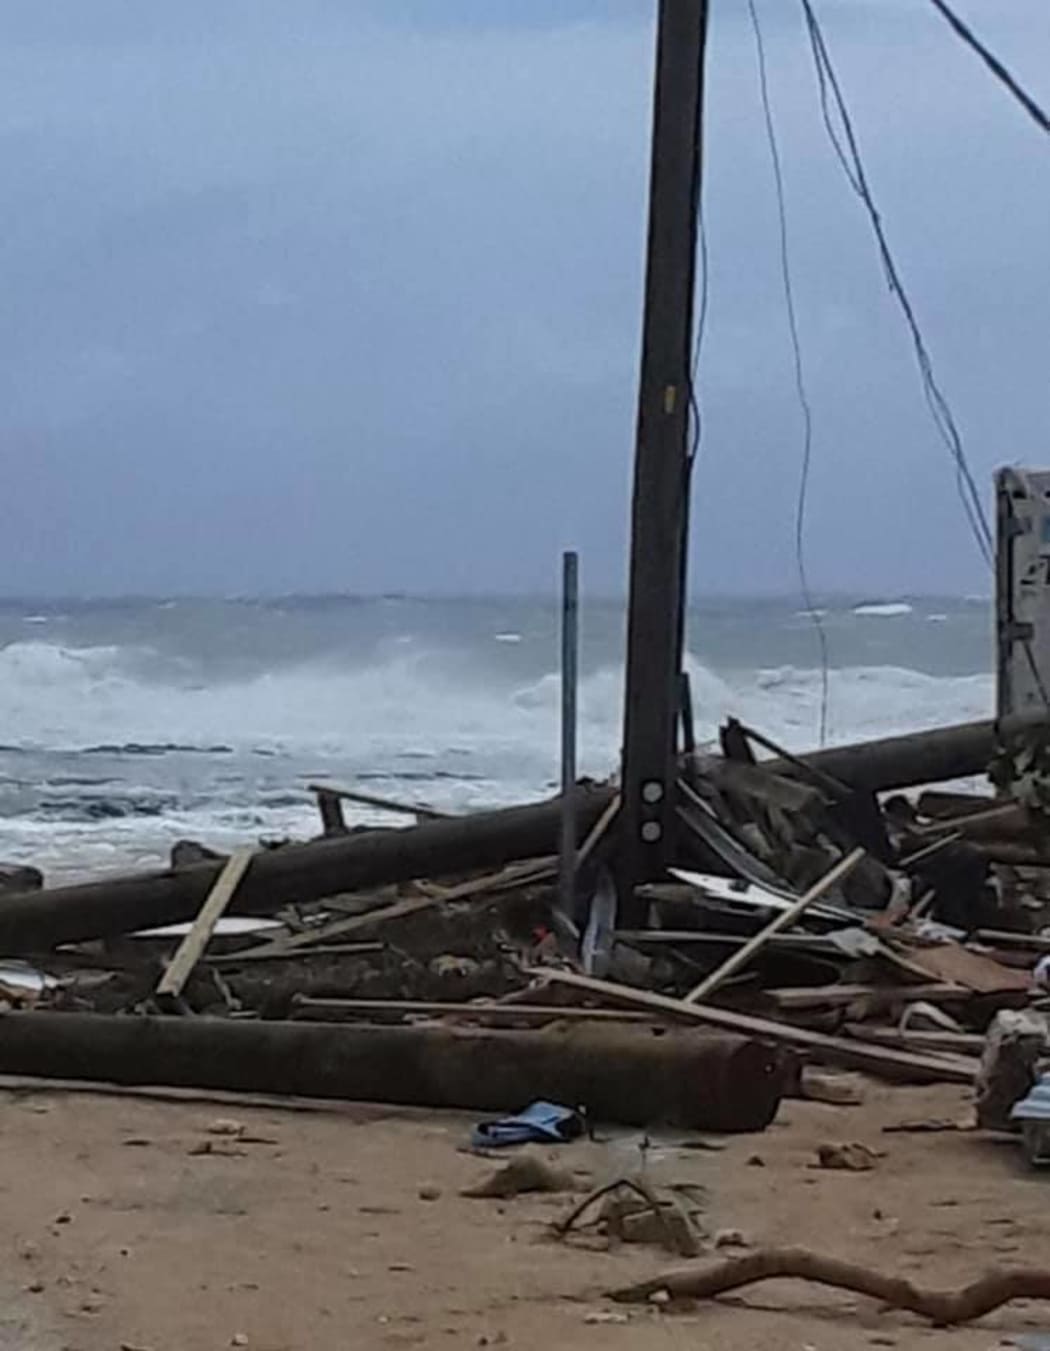 Waterfront offices in 'Eua were destroyed by Cyclone Harold